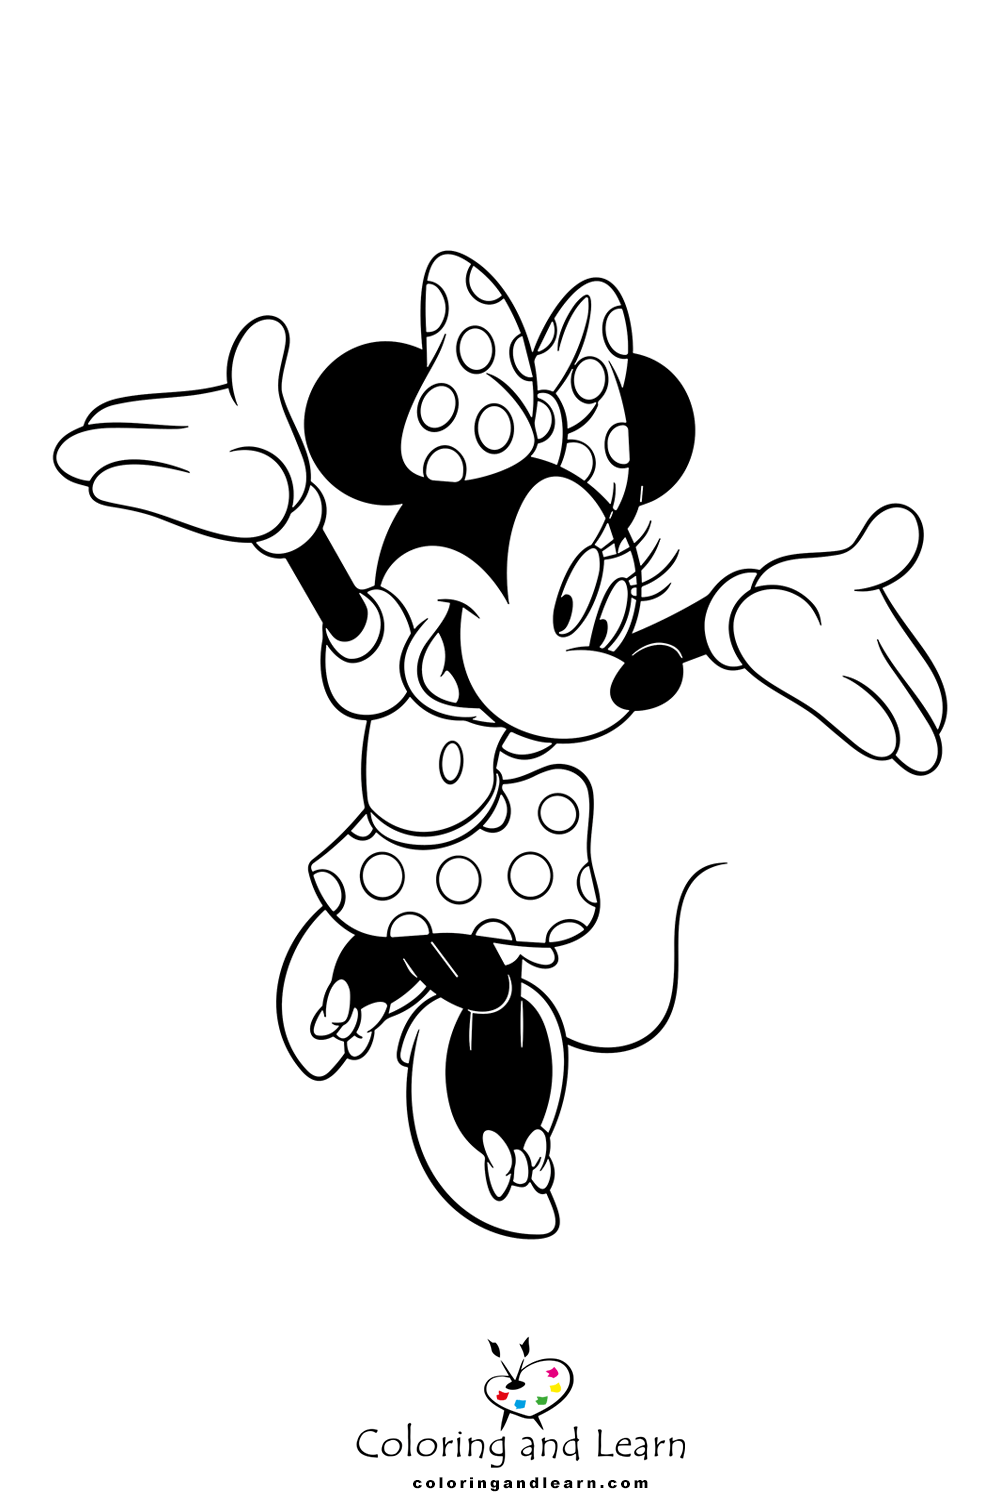 Minnie Mouse in a long dress coloring page